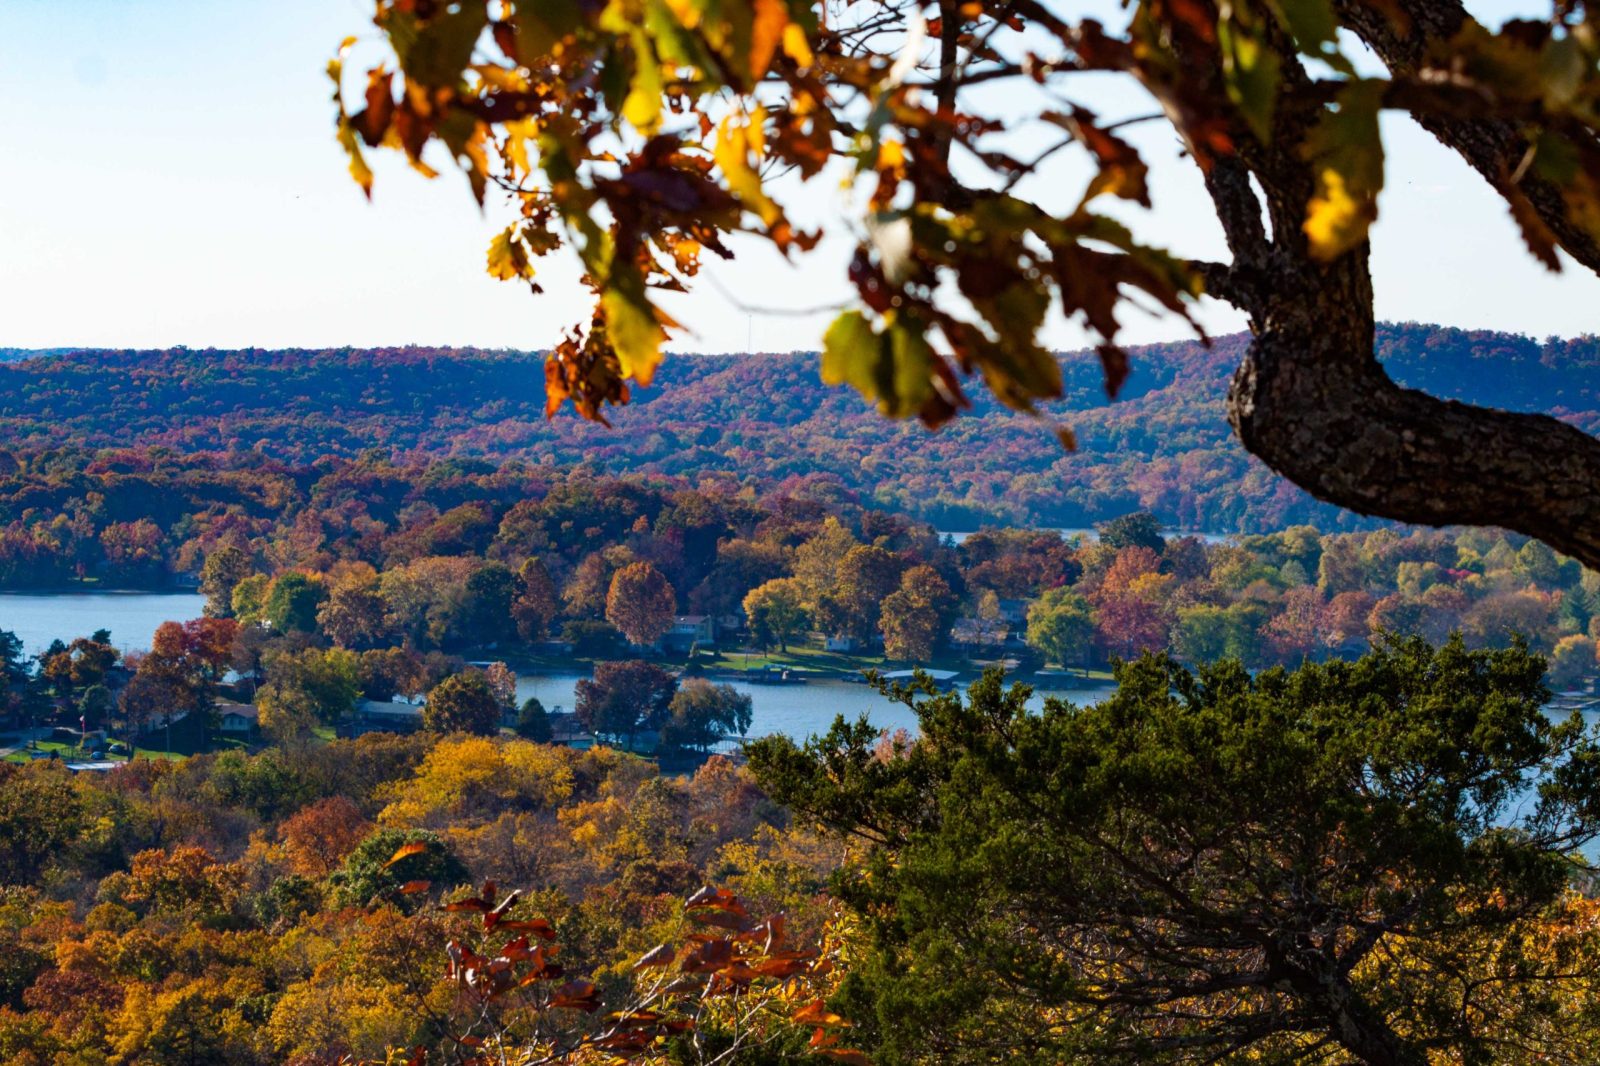 Wineries at Lake of the Ozarks are the perfect fall escape